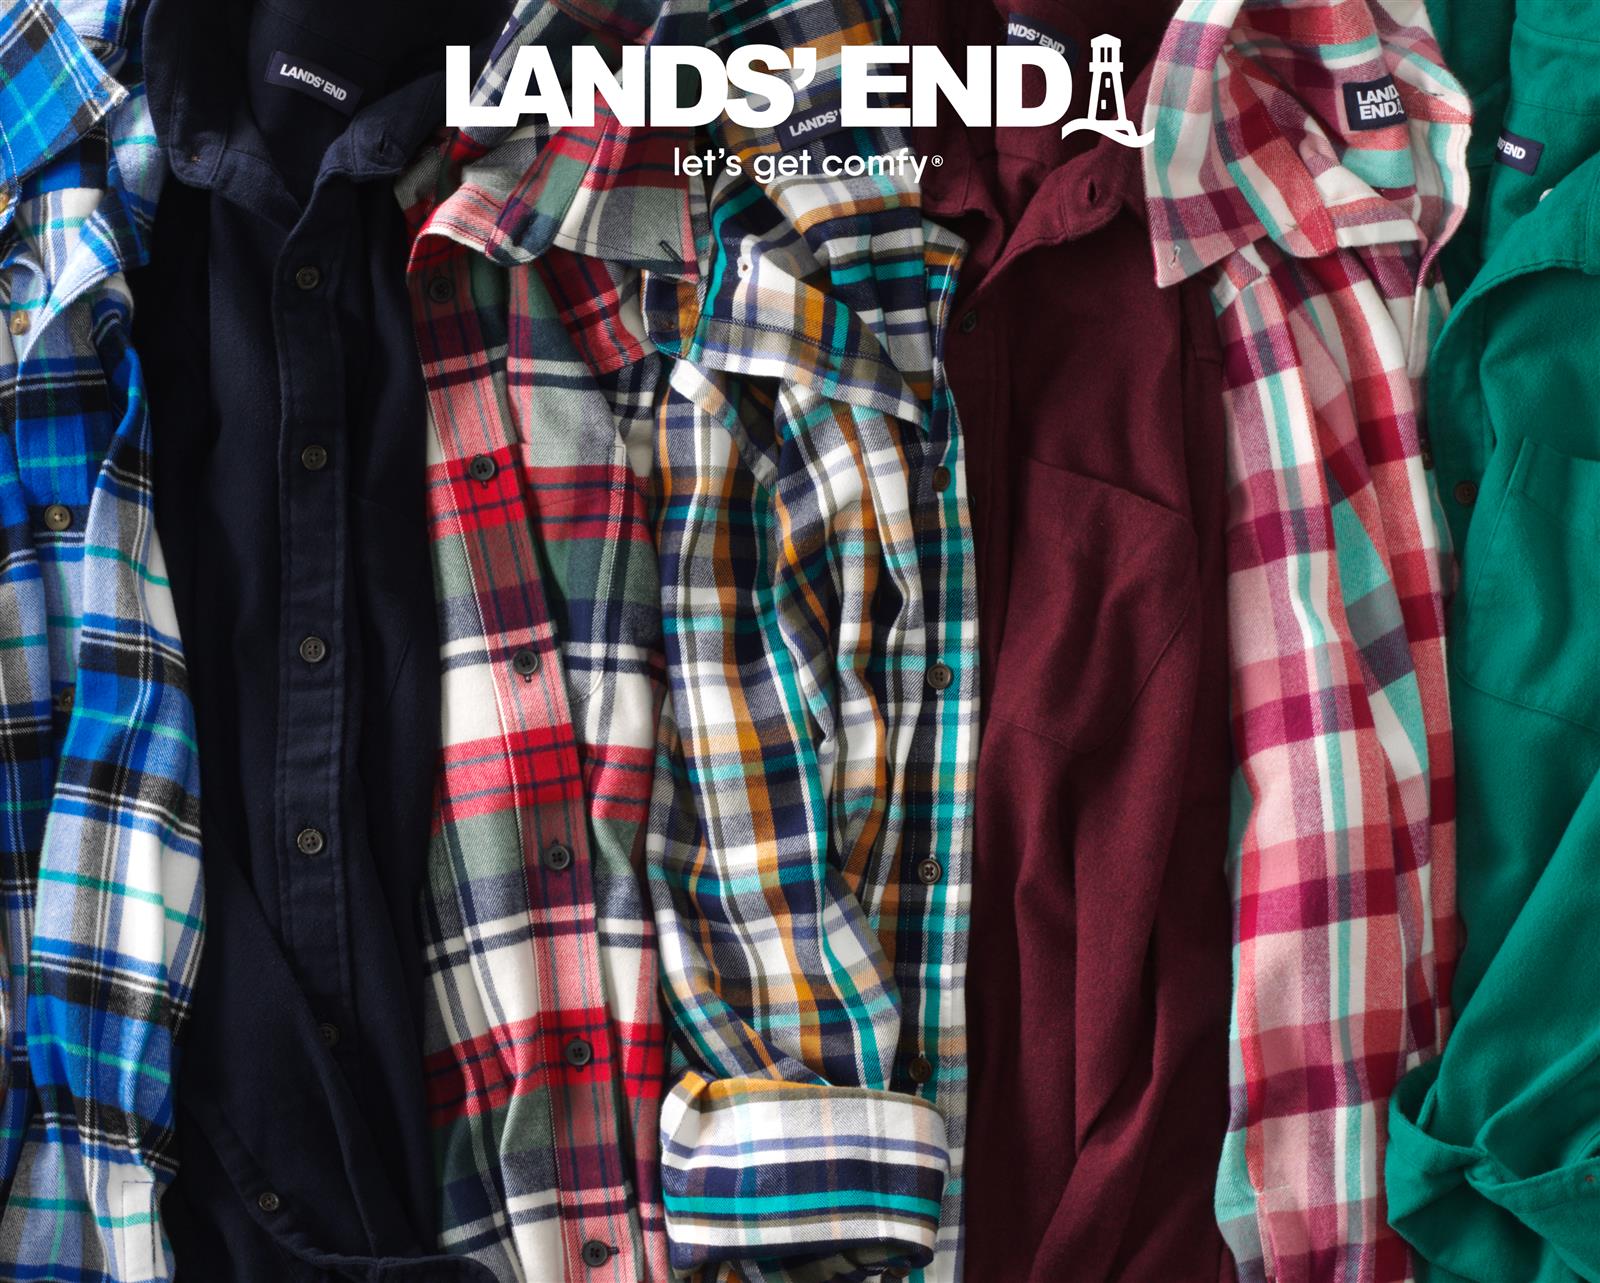 Flannel Apparel for Fall and Winter